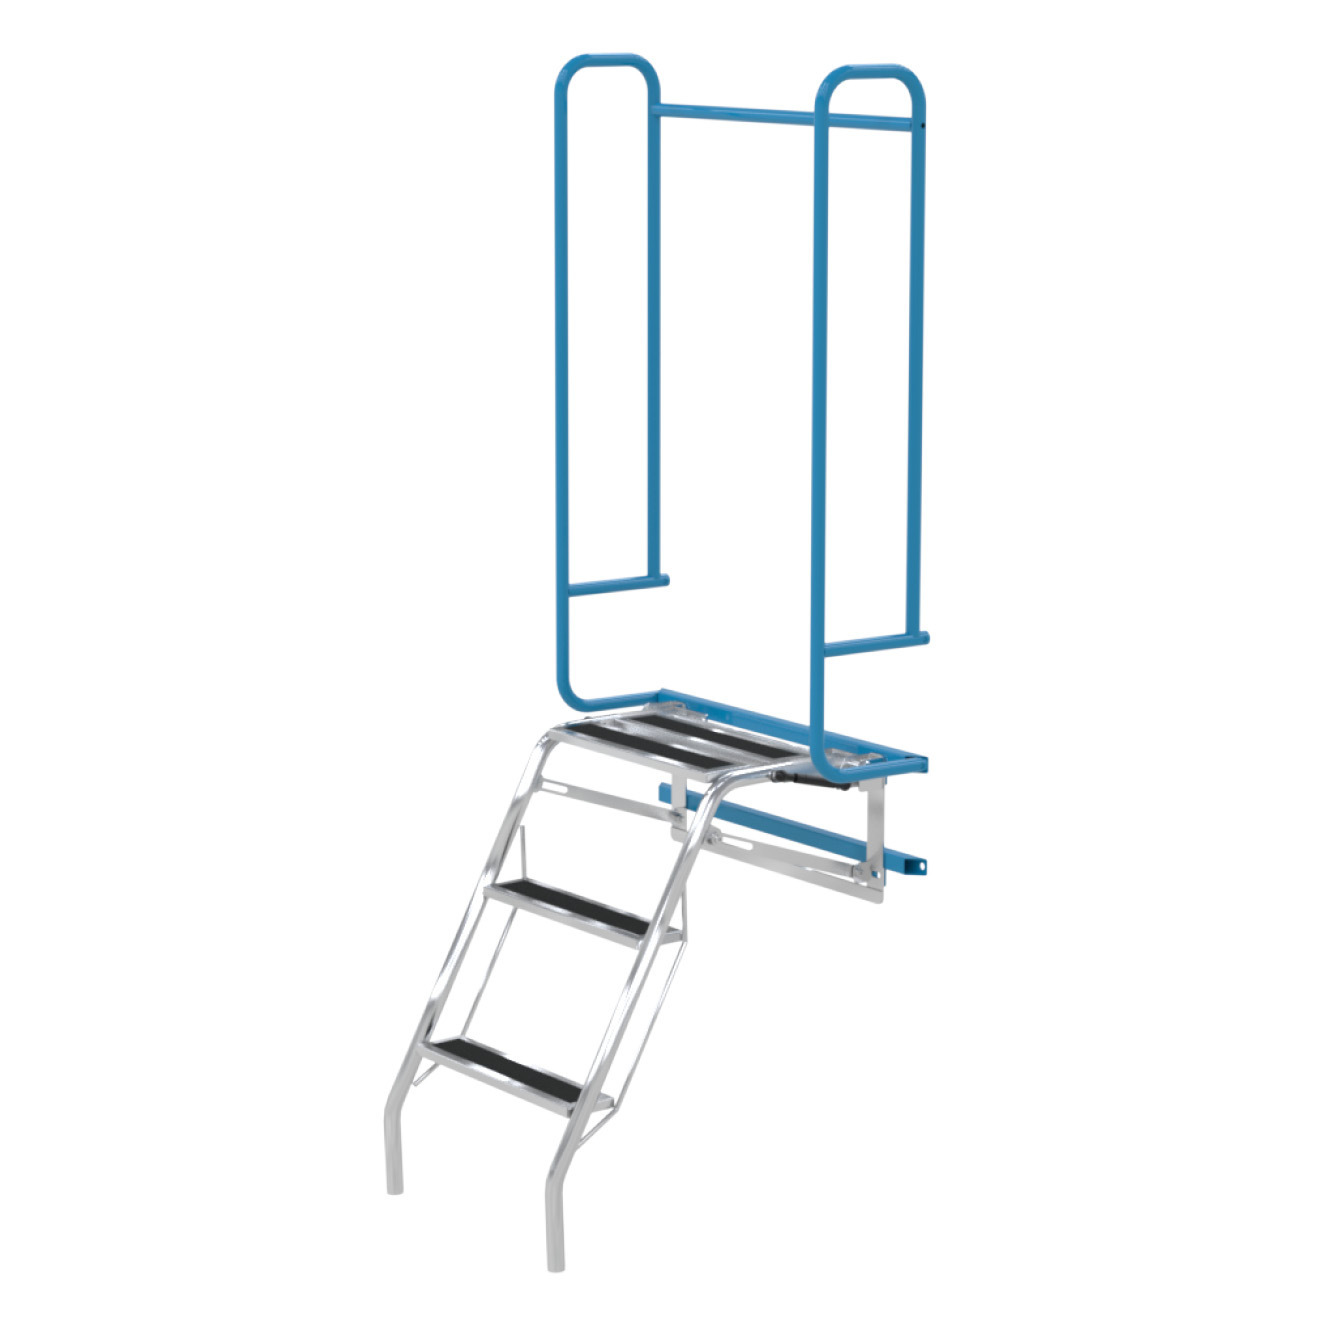 Ladder & Handle Kit to suit